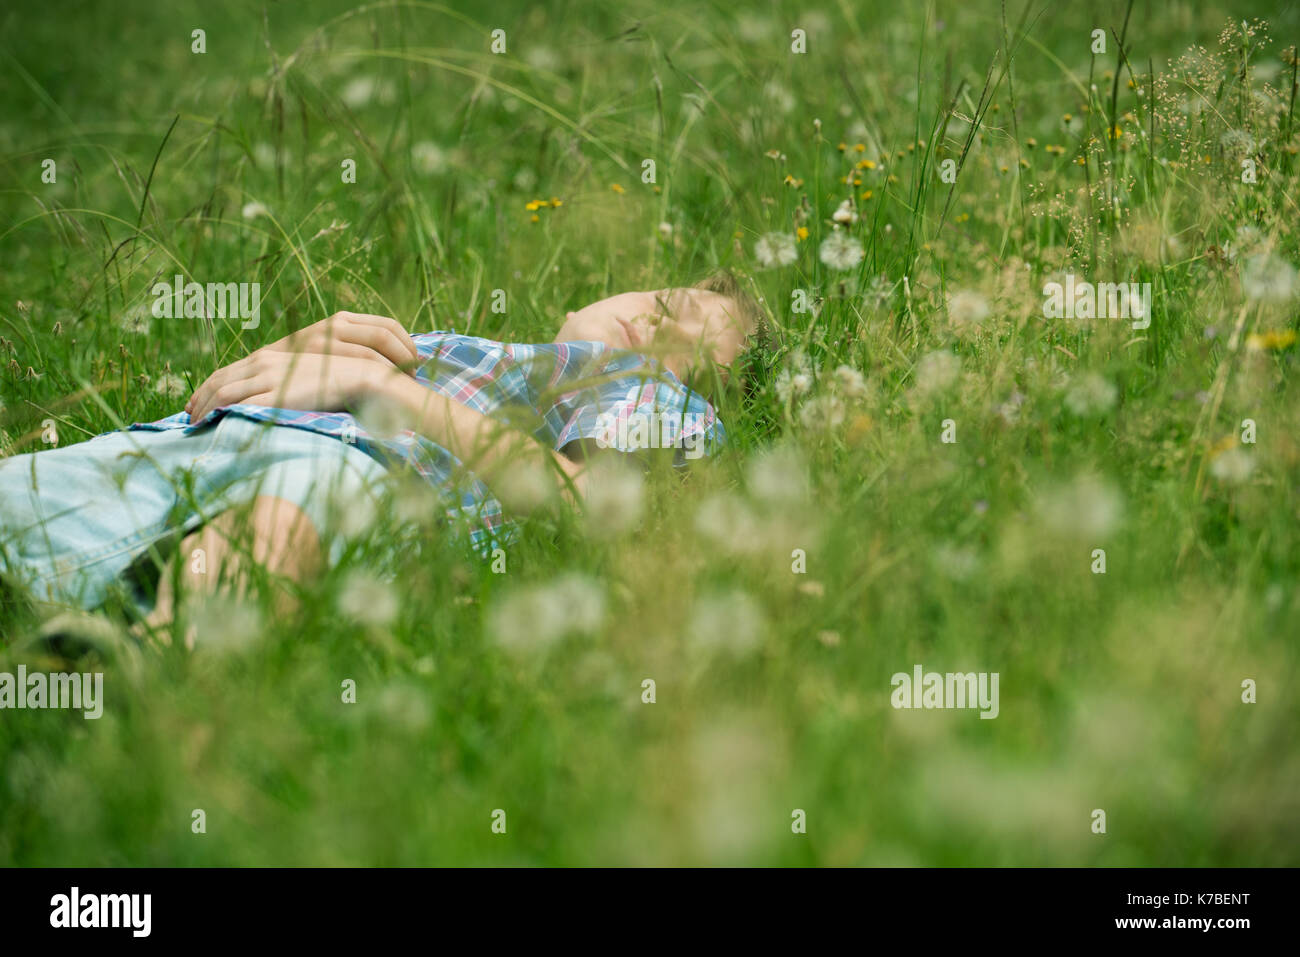 Boy napping on grass Stock Photo